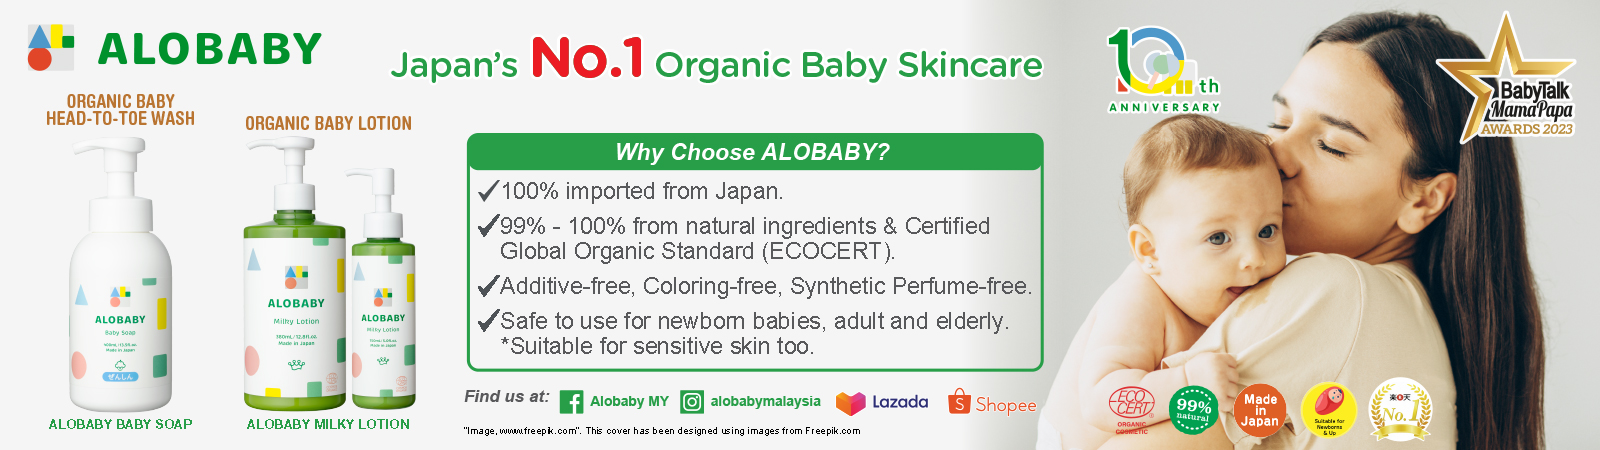 Alobaby Milky Lotion